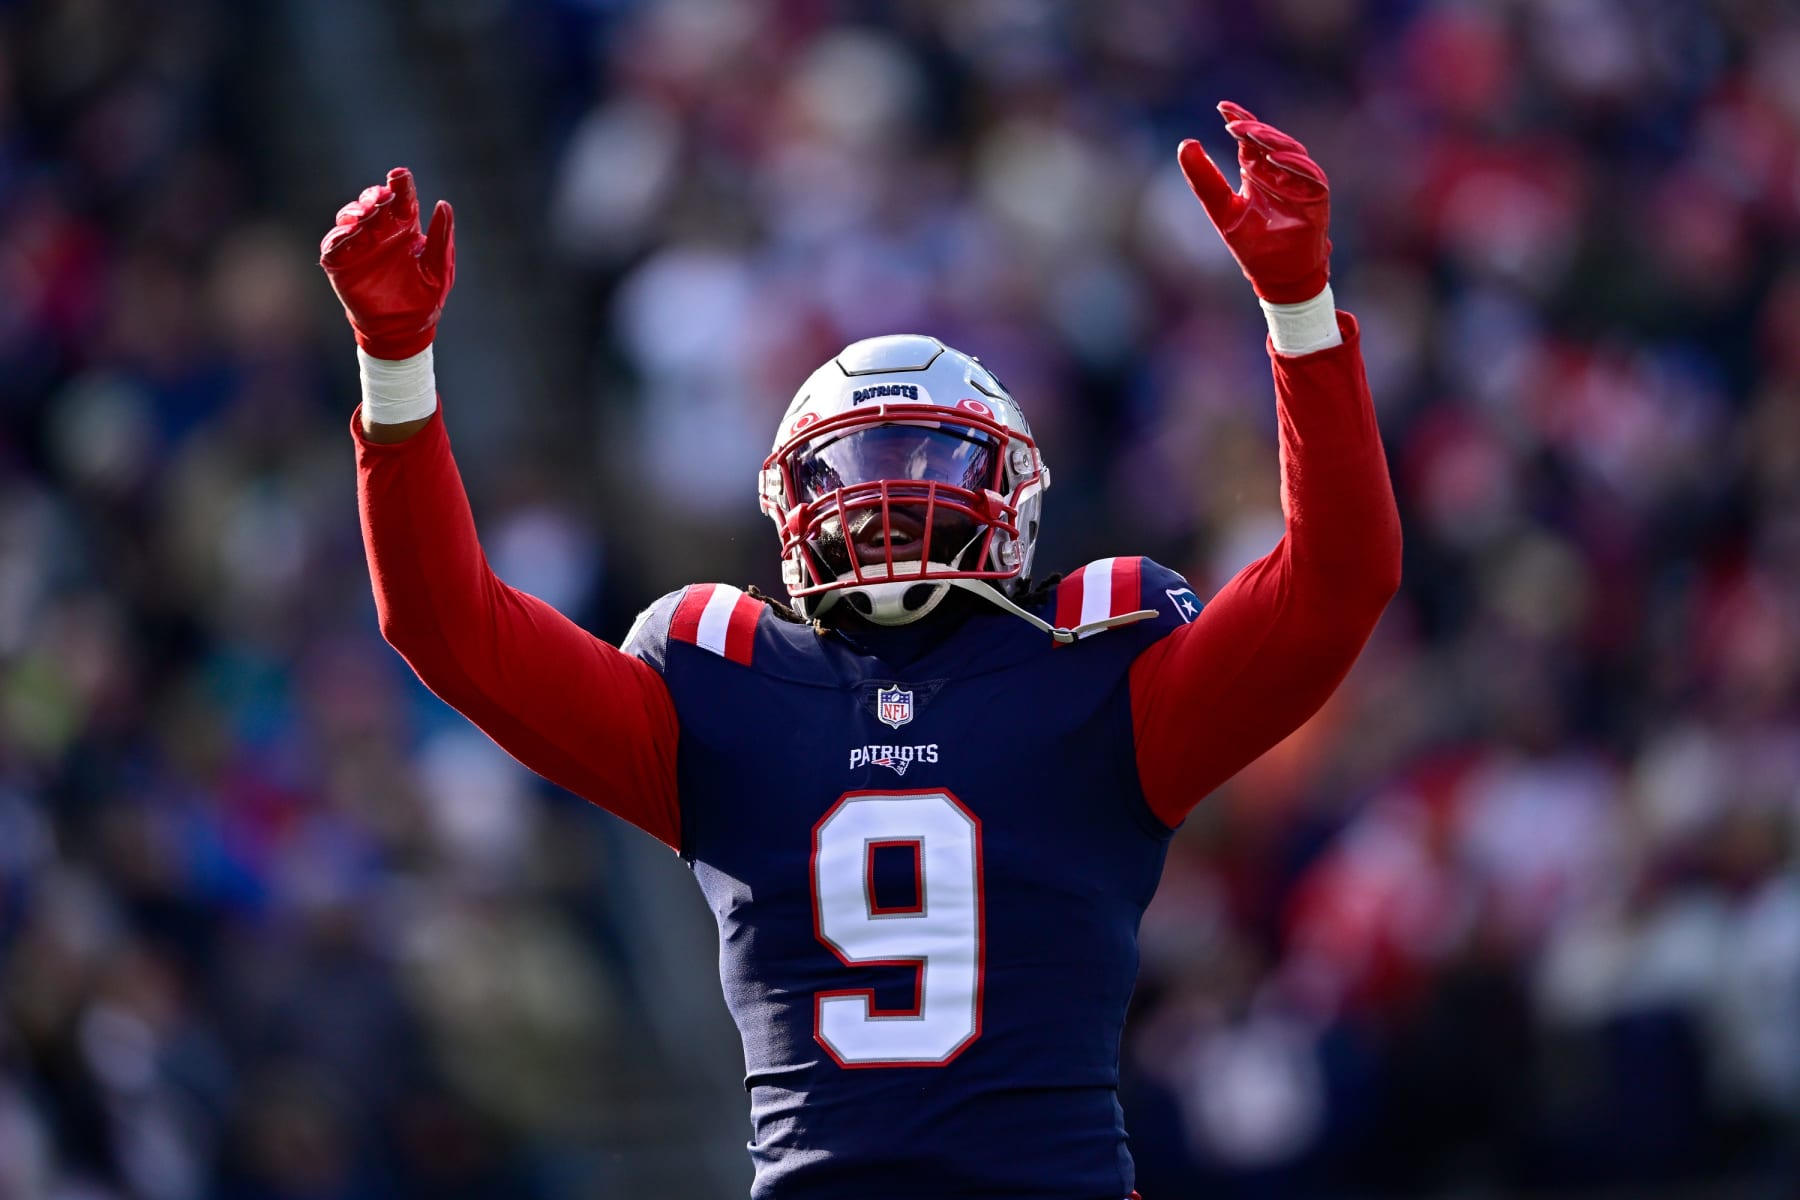 Matthew Judon vocal on what Patriots have to do to be a contender